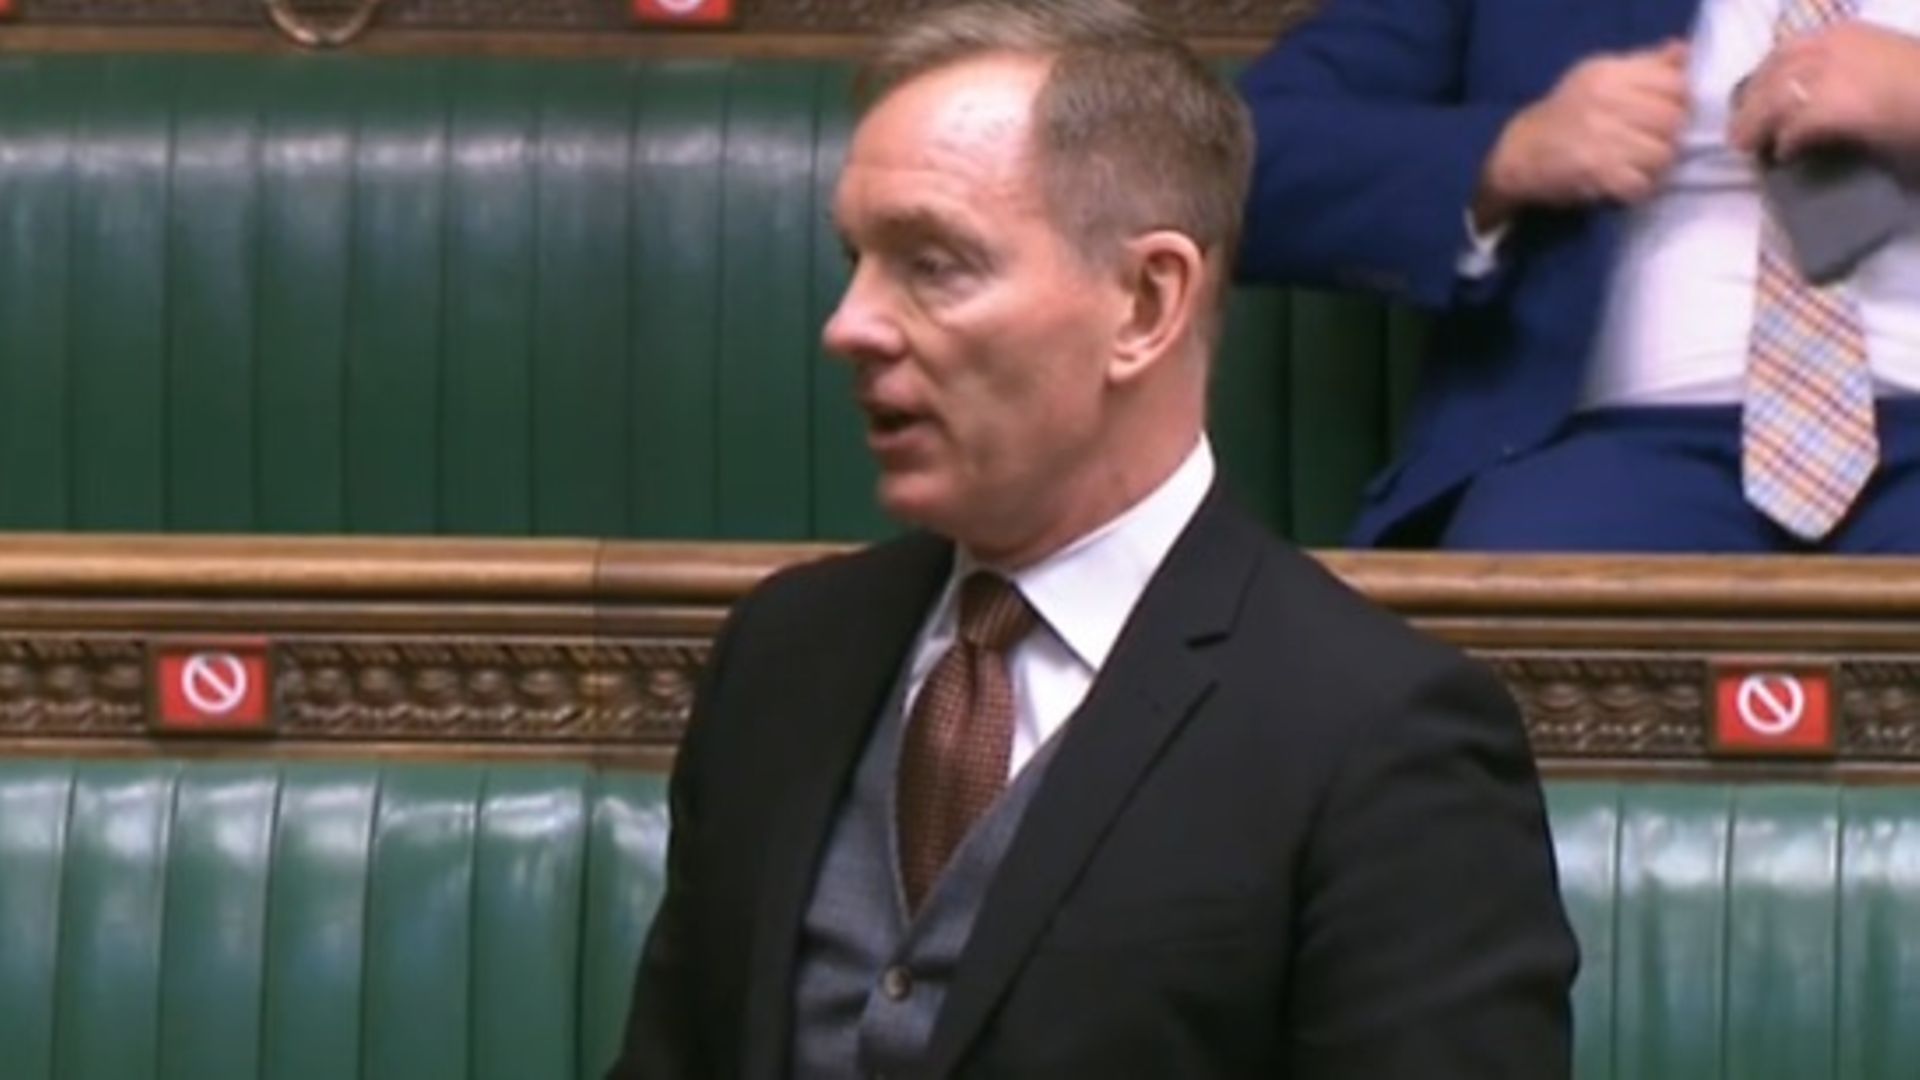 Chris Bryant in the House of Commons - Credit: Parliament Live